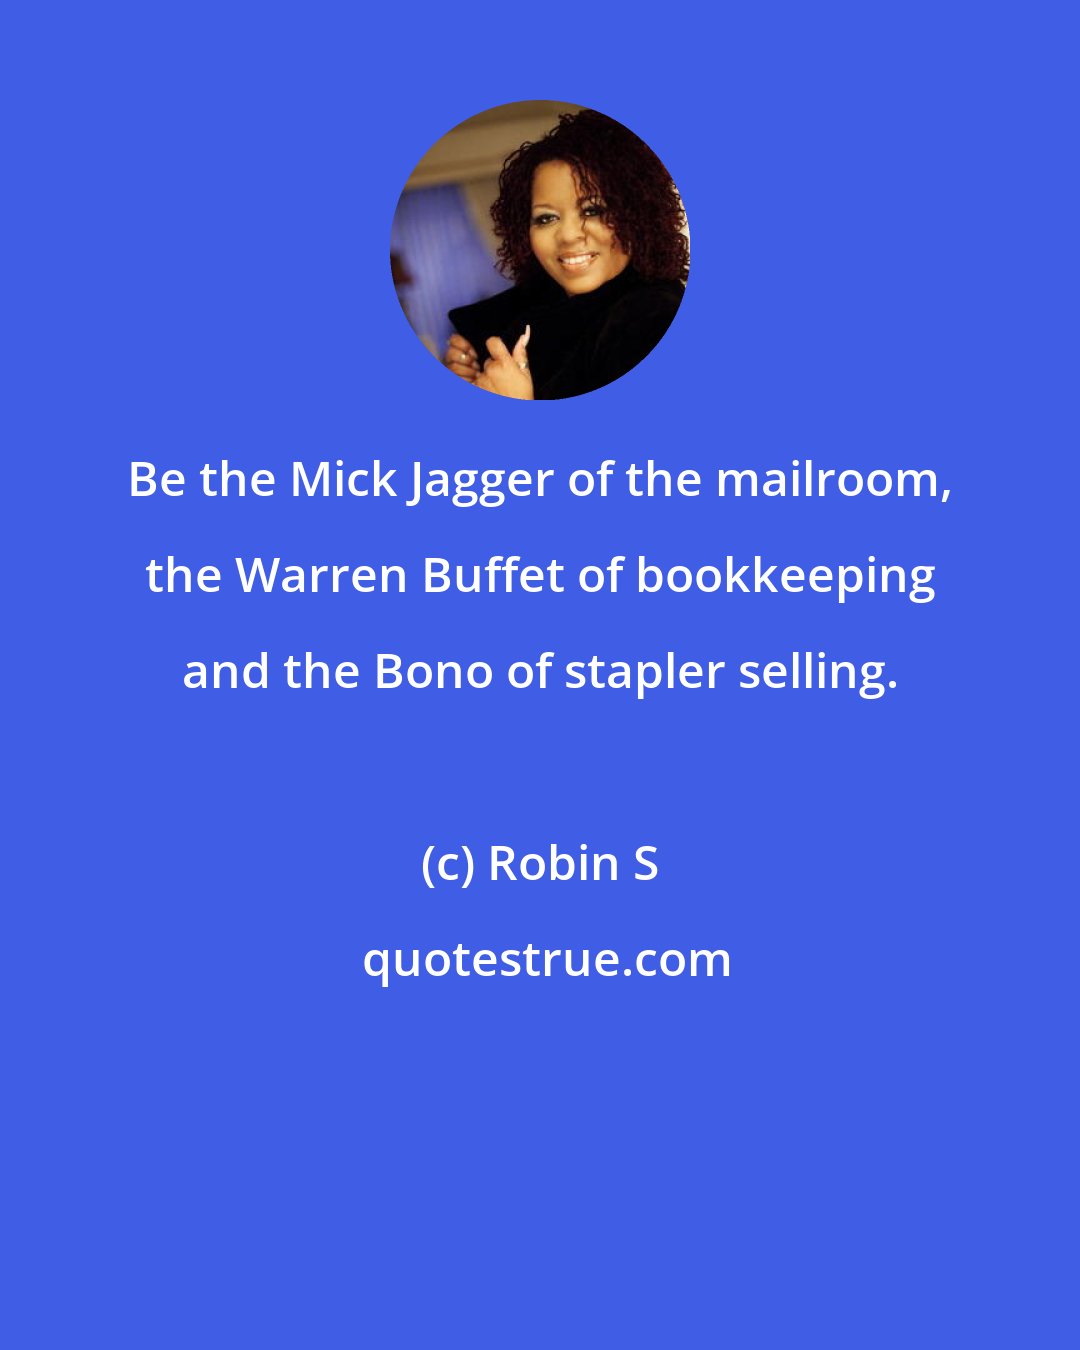 Robin S: Be the Mick Jagger of the mailroom, the Warren Buffet of bookkeeping and the Bono of stapler selling.